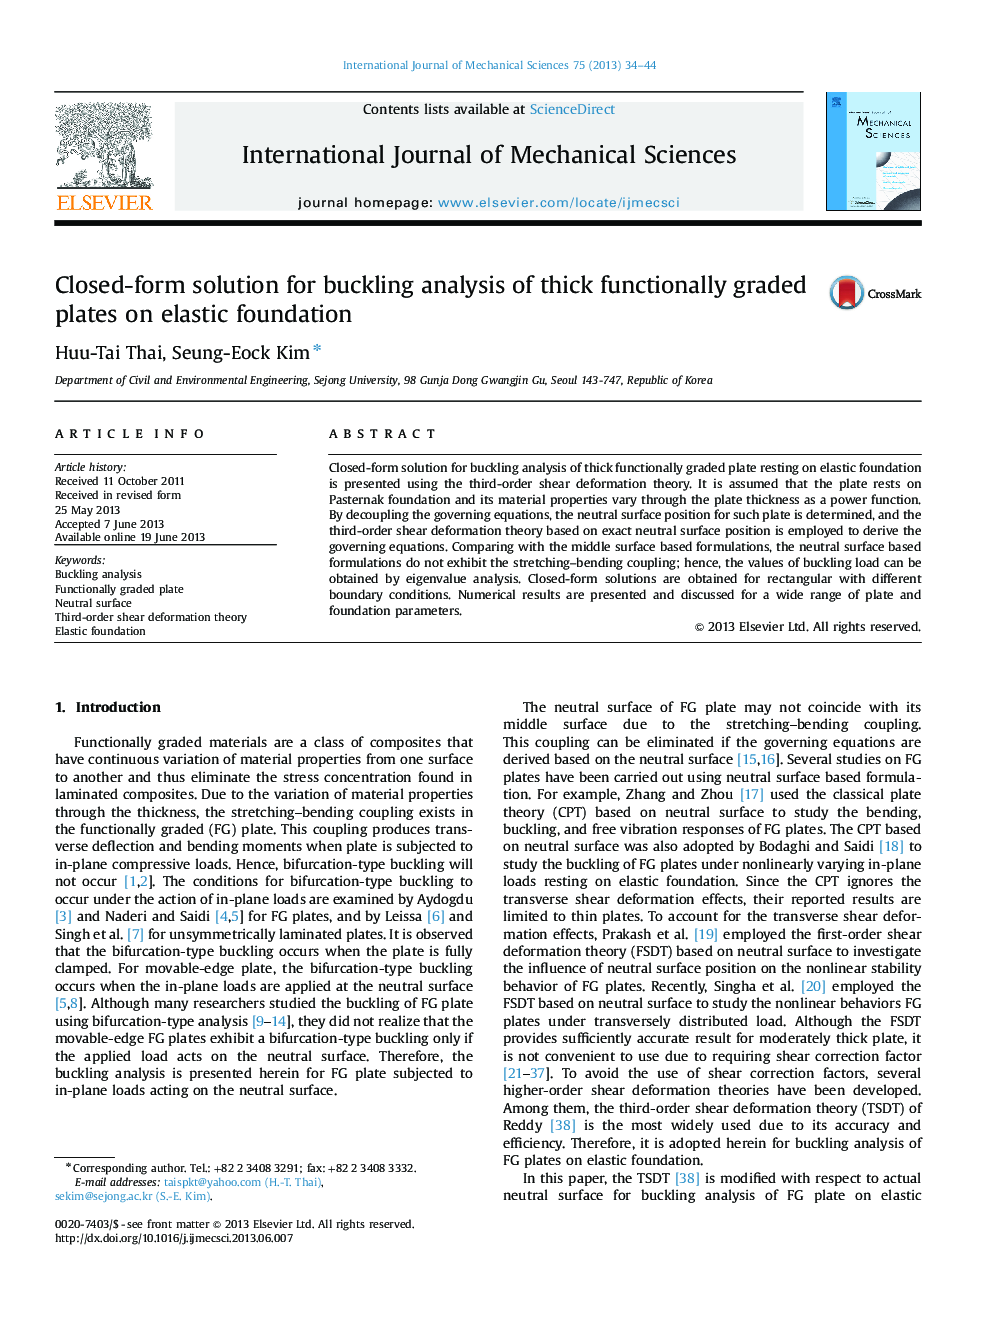 Closed-form solution for buckling analysis of thick functionally graded plates on elastic foundation